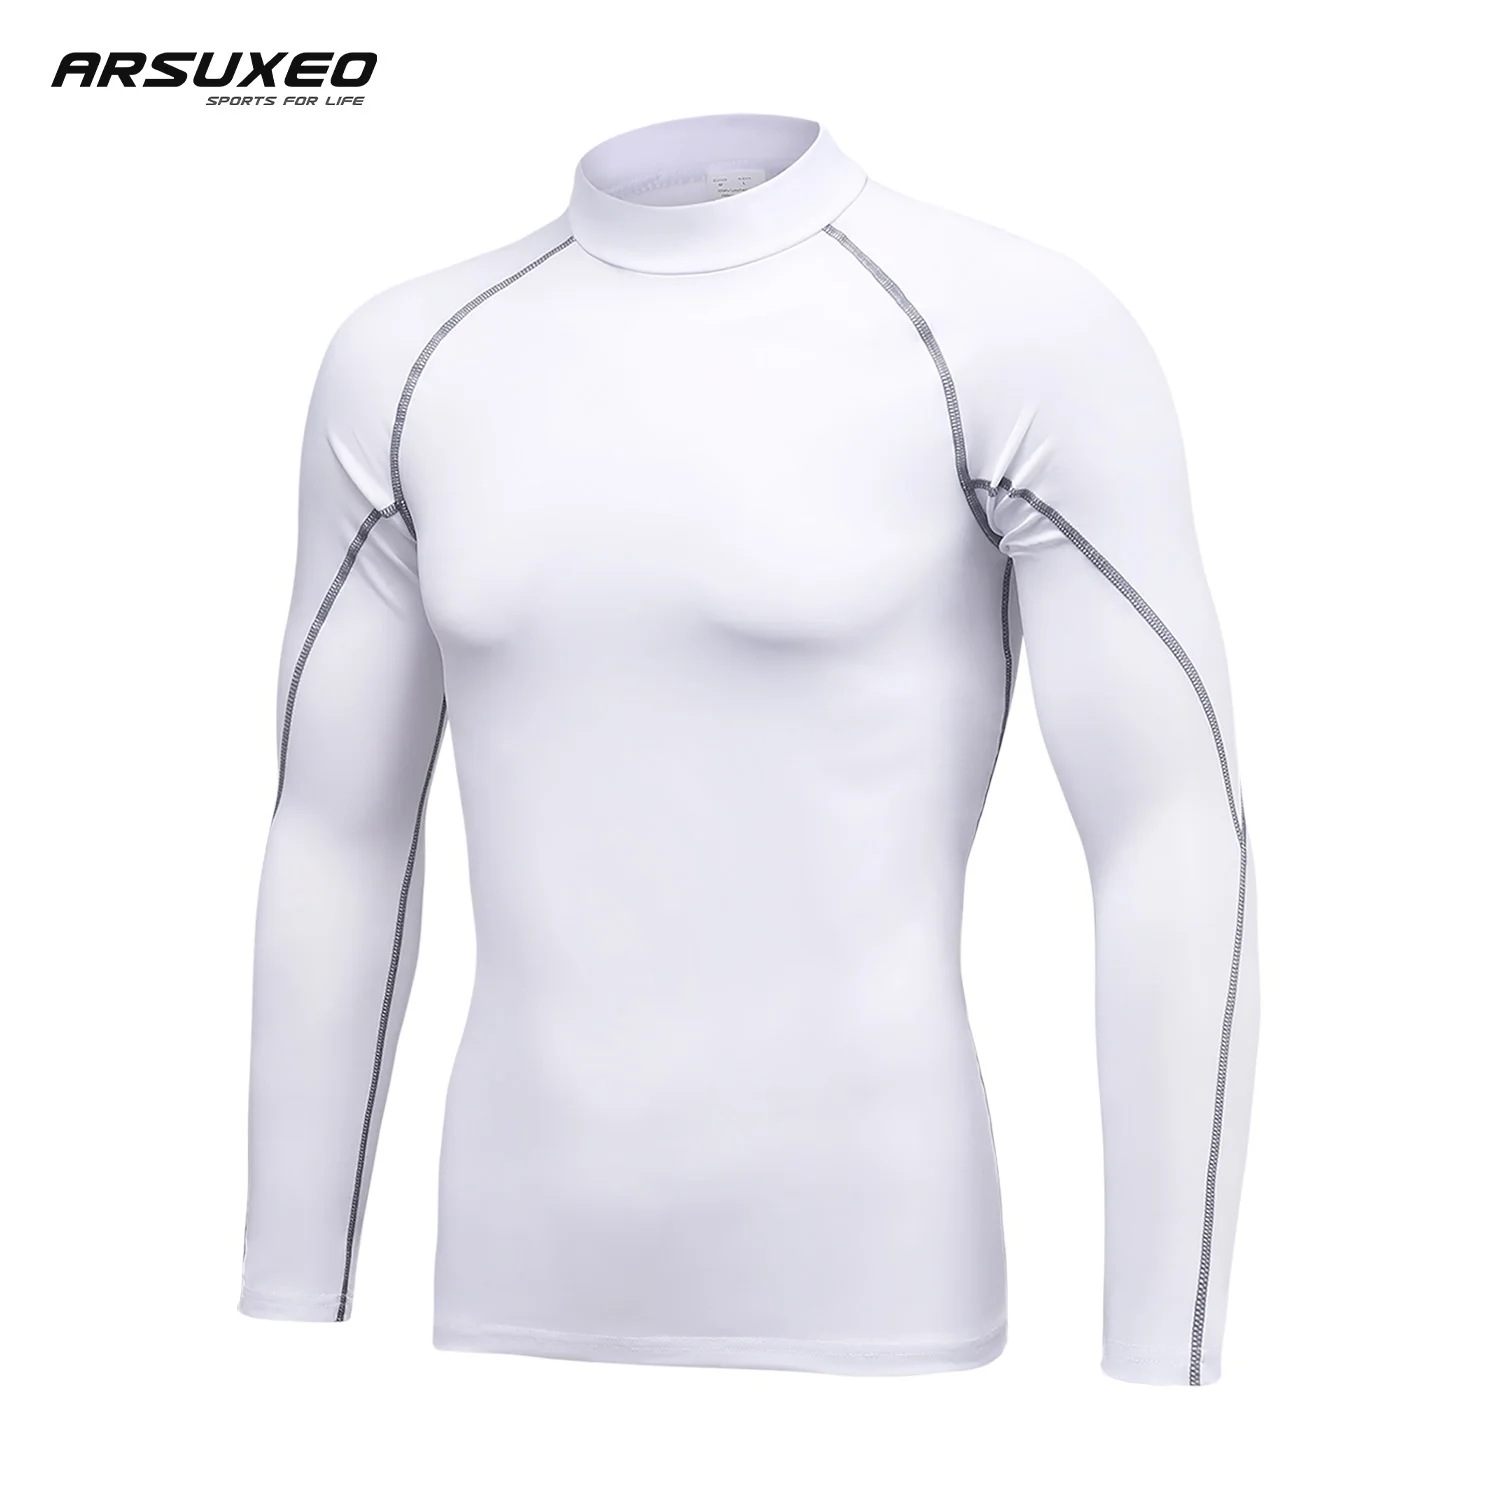 

ARSUXEO Men Compression T-shirt Long Sleeve Quick Dry Running Shirt Bodybuilding Fitness Gym Workout Training Sport T-Shirt